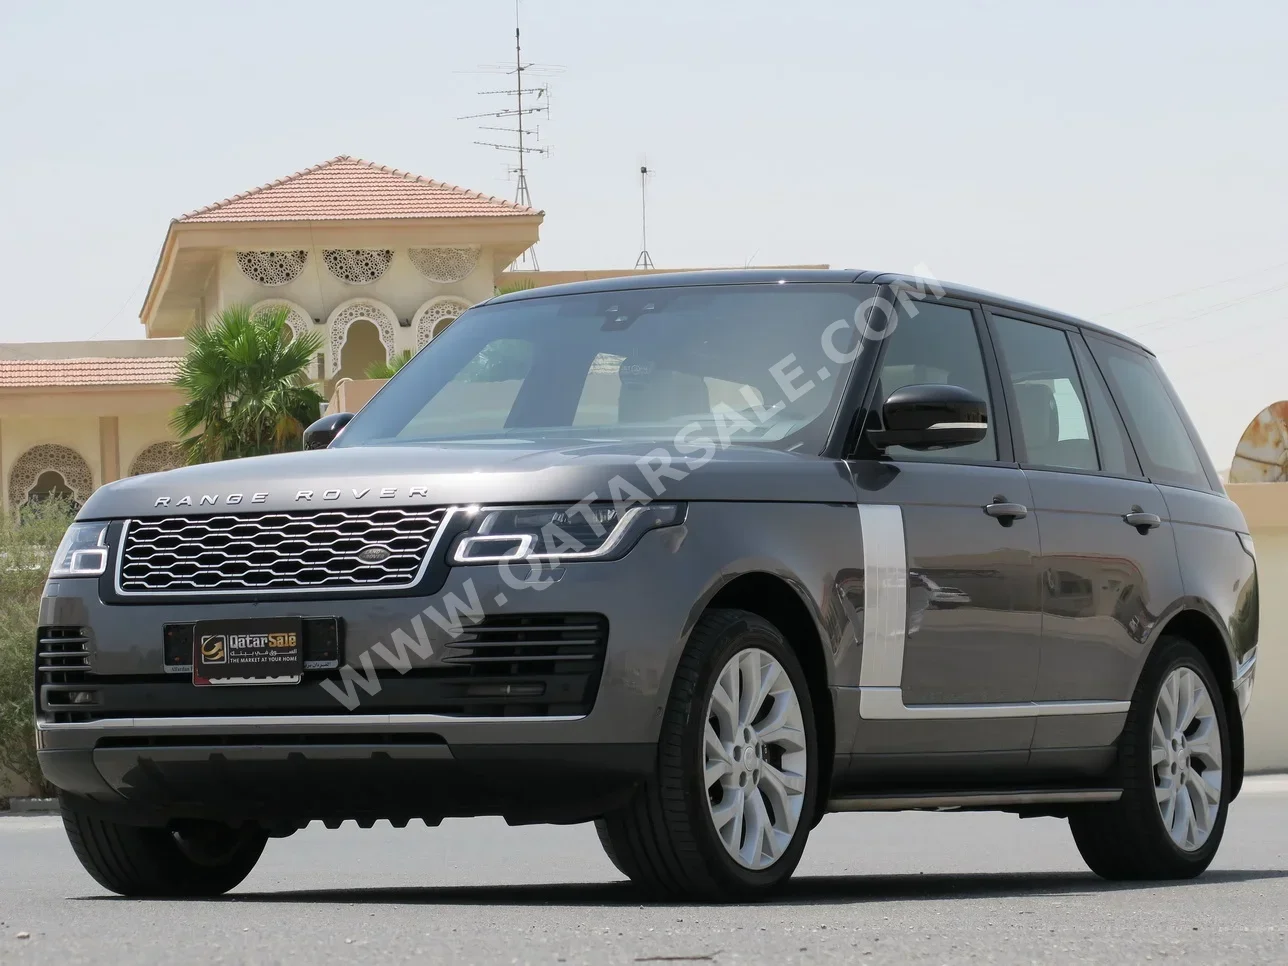 Land Rover  Range Rover  Vogue Super charged  2019  Automatic  85,000 Km  6 Cylinder  Four Wheel Drive (4WD)  SUV  Gray